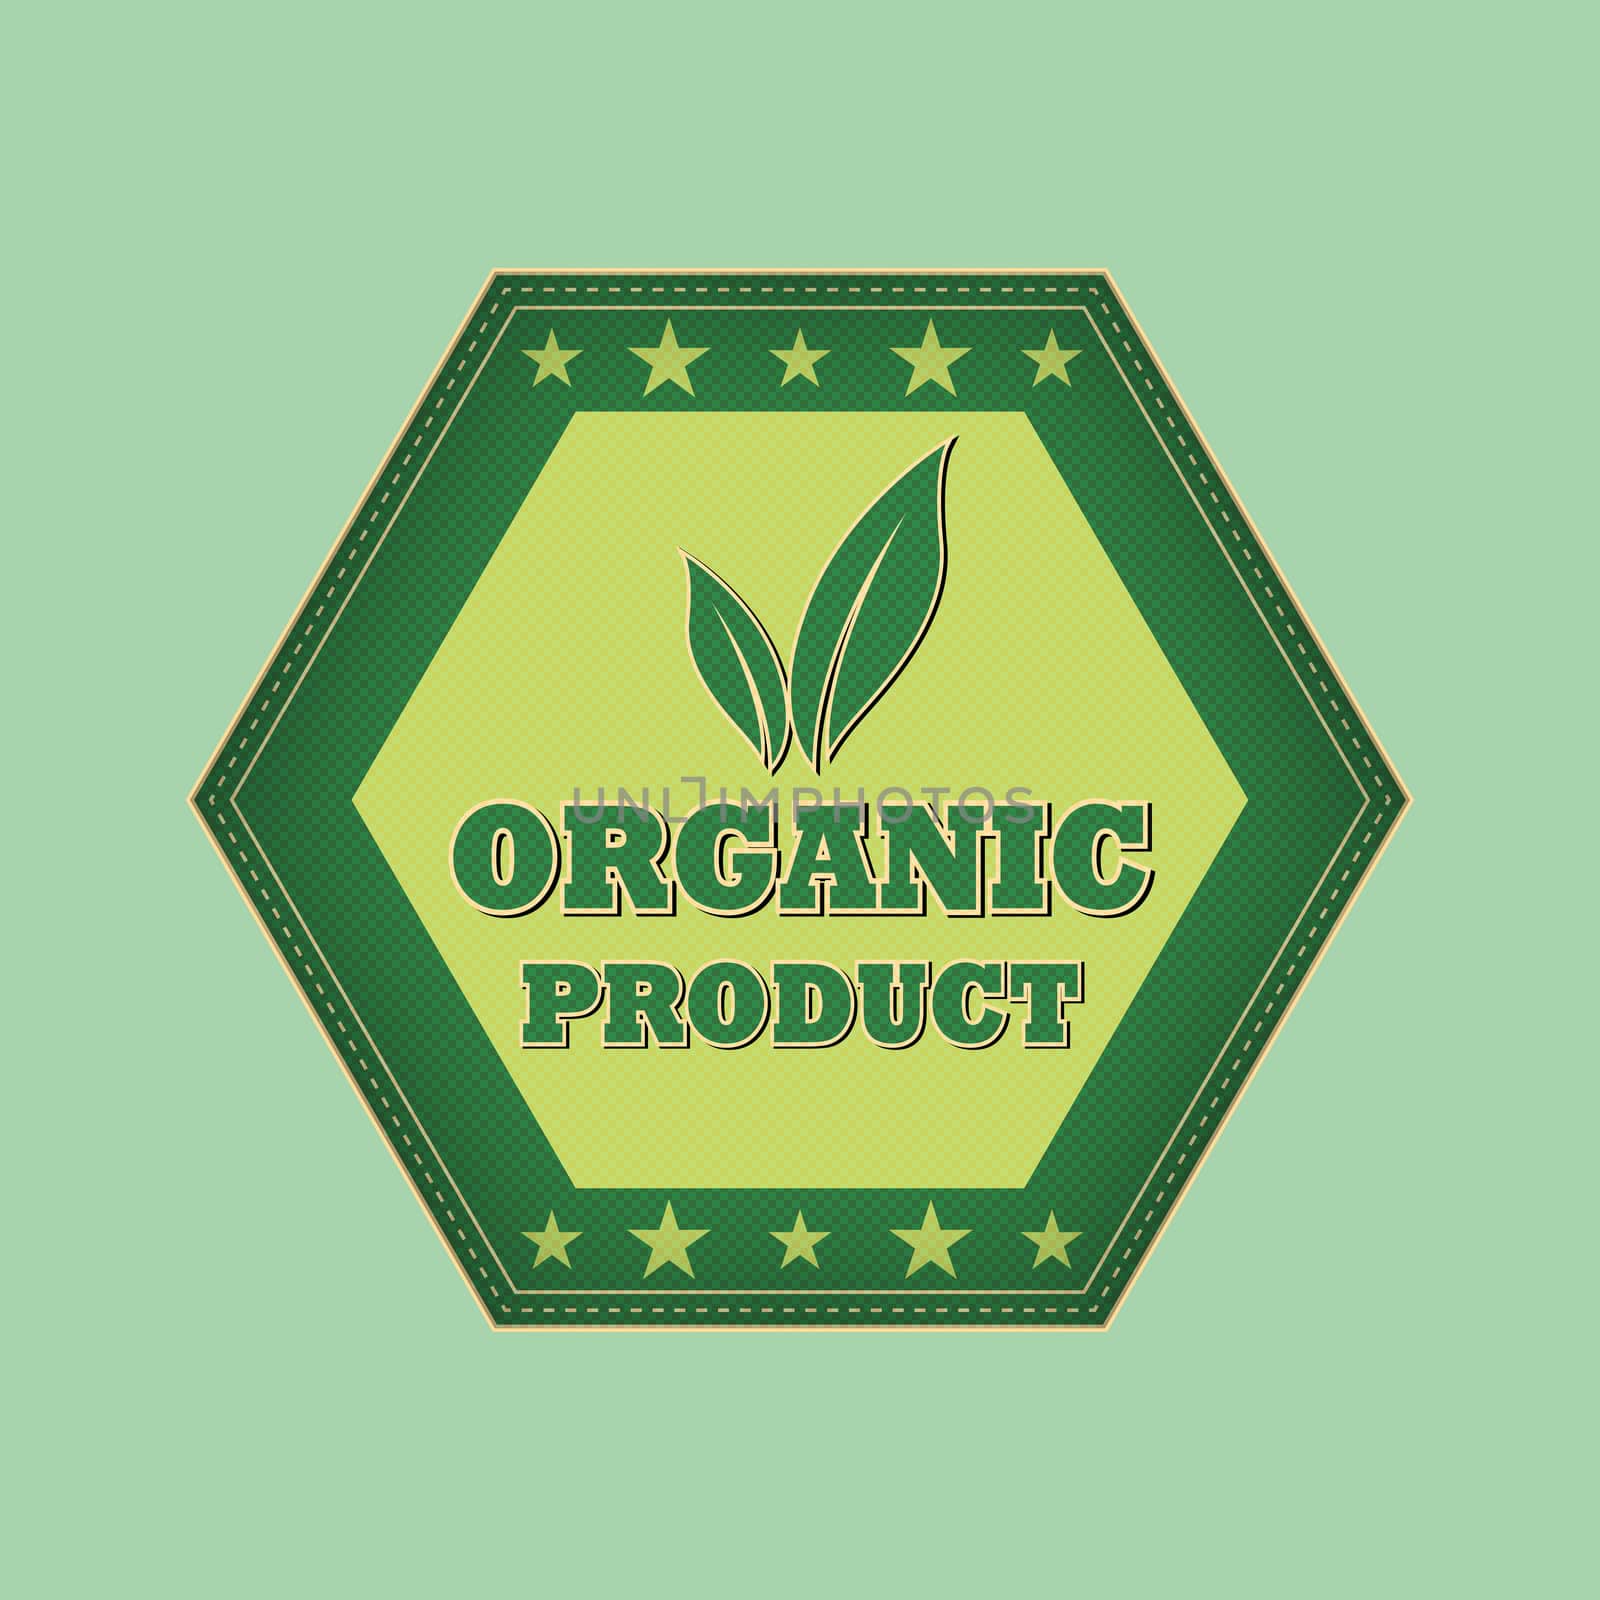 organic product and leaf sign - retro style green hexagon label with text, symbol and stars, business eco bio concept